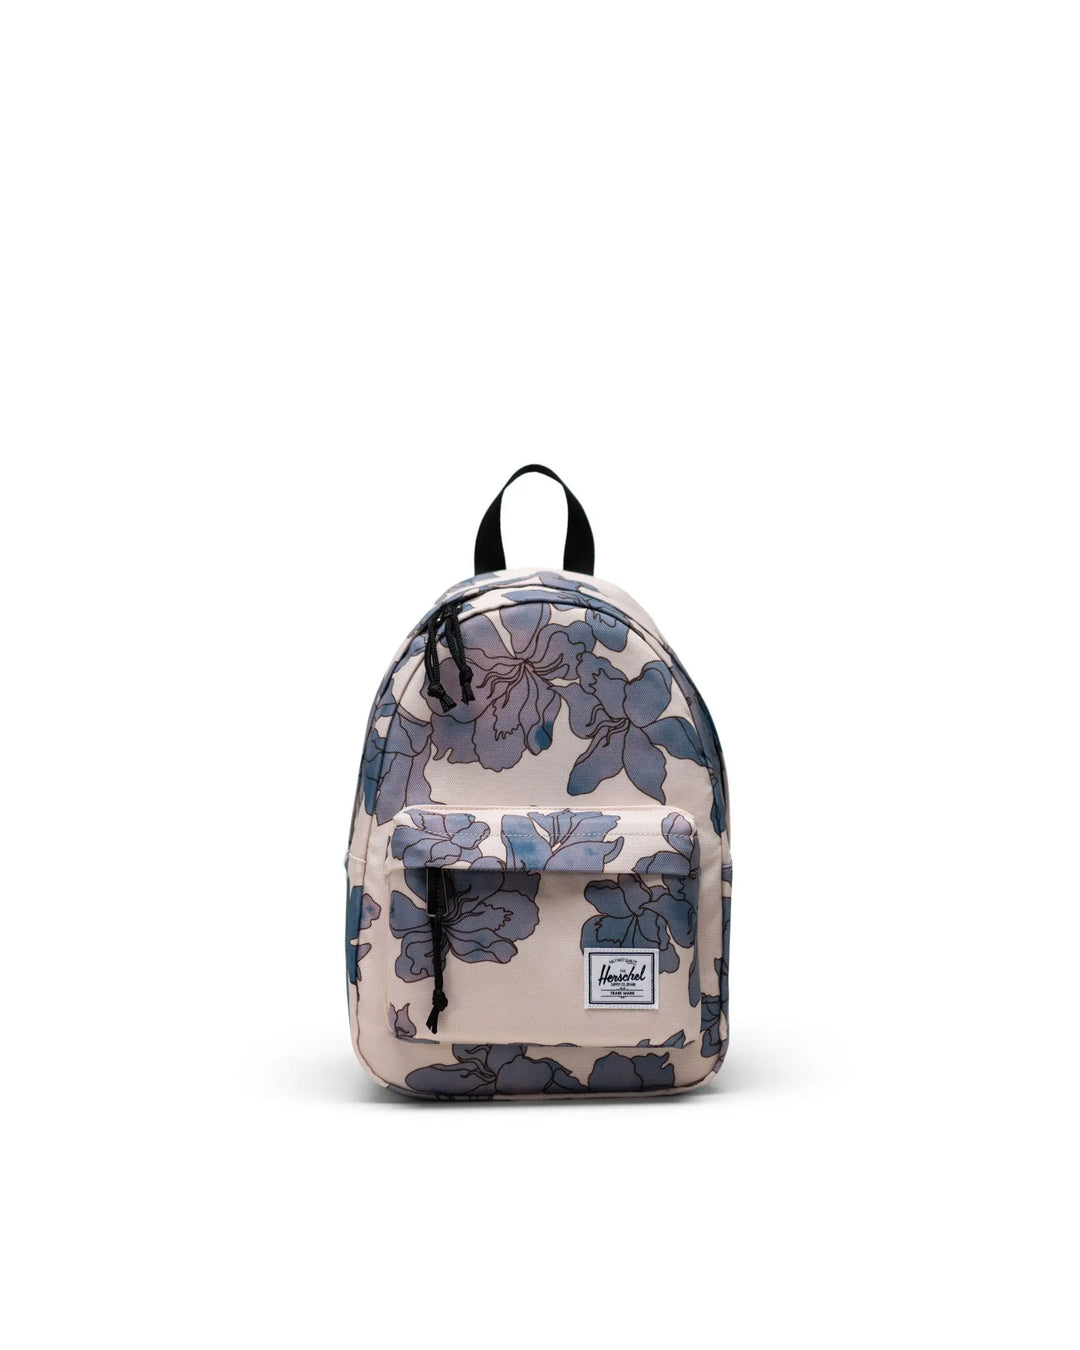 Herschel Supply Co. Classic Backpack Mini - 6.5L - Moonbeam Floral Waves - Sun Diego Boardshop